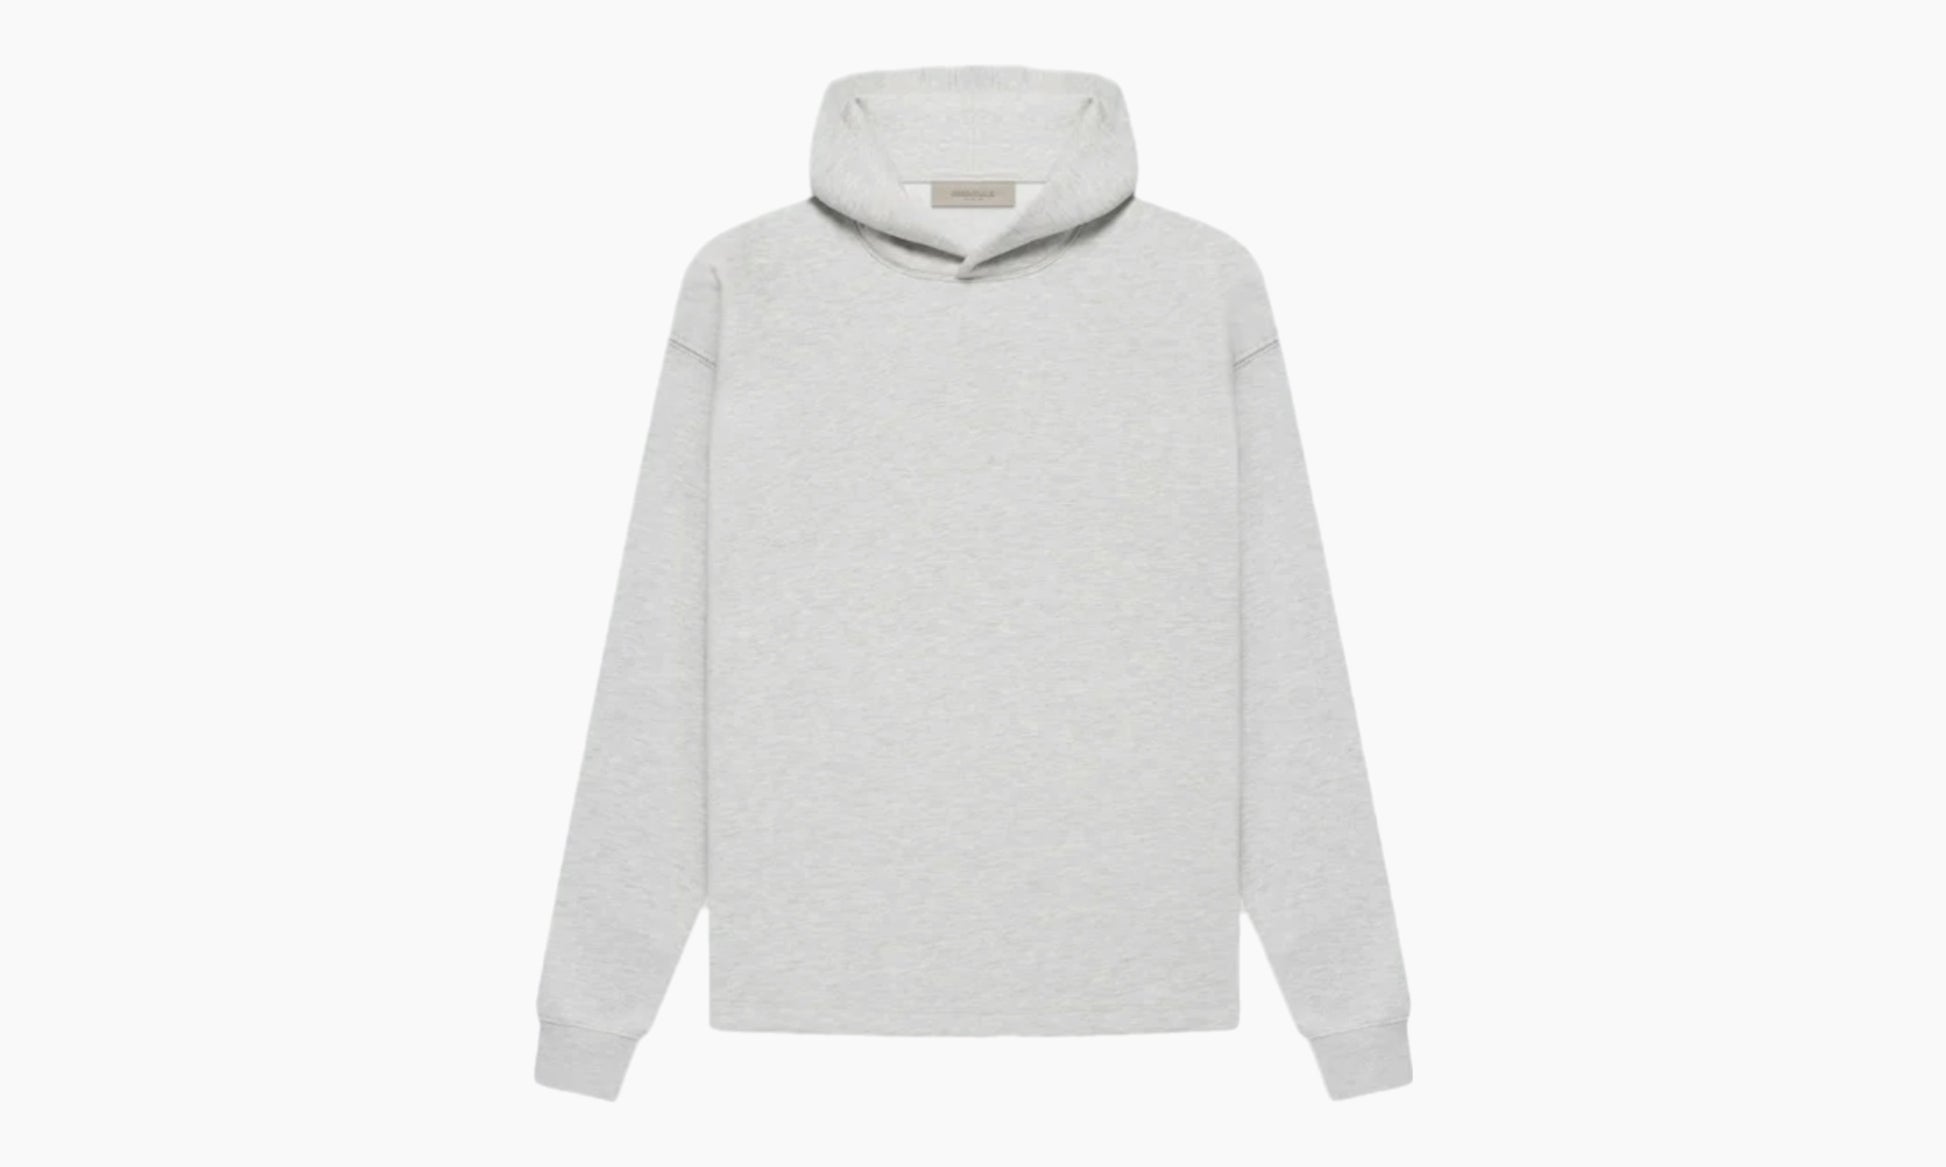 Essentials Relaxed Hoodie SS22 Light Oatmeal | The Sortage